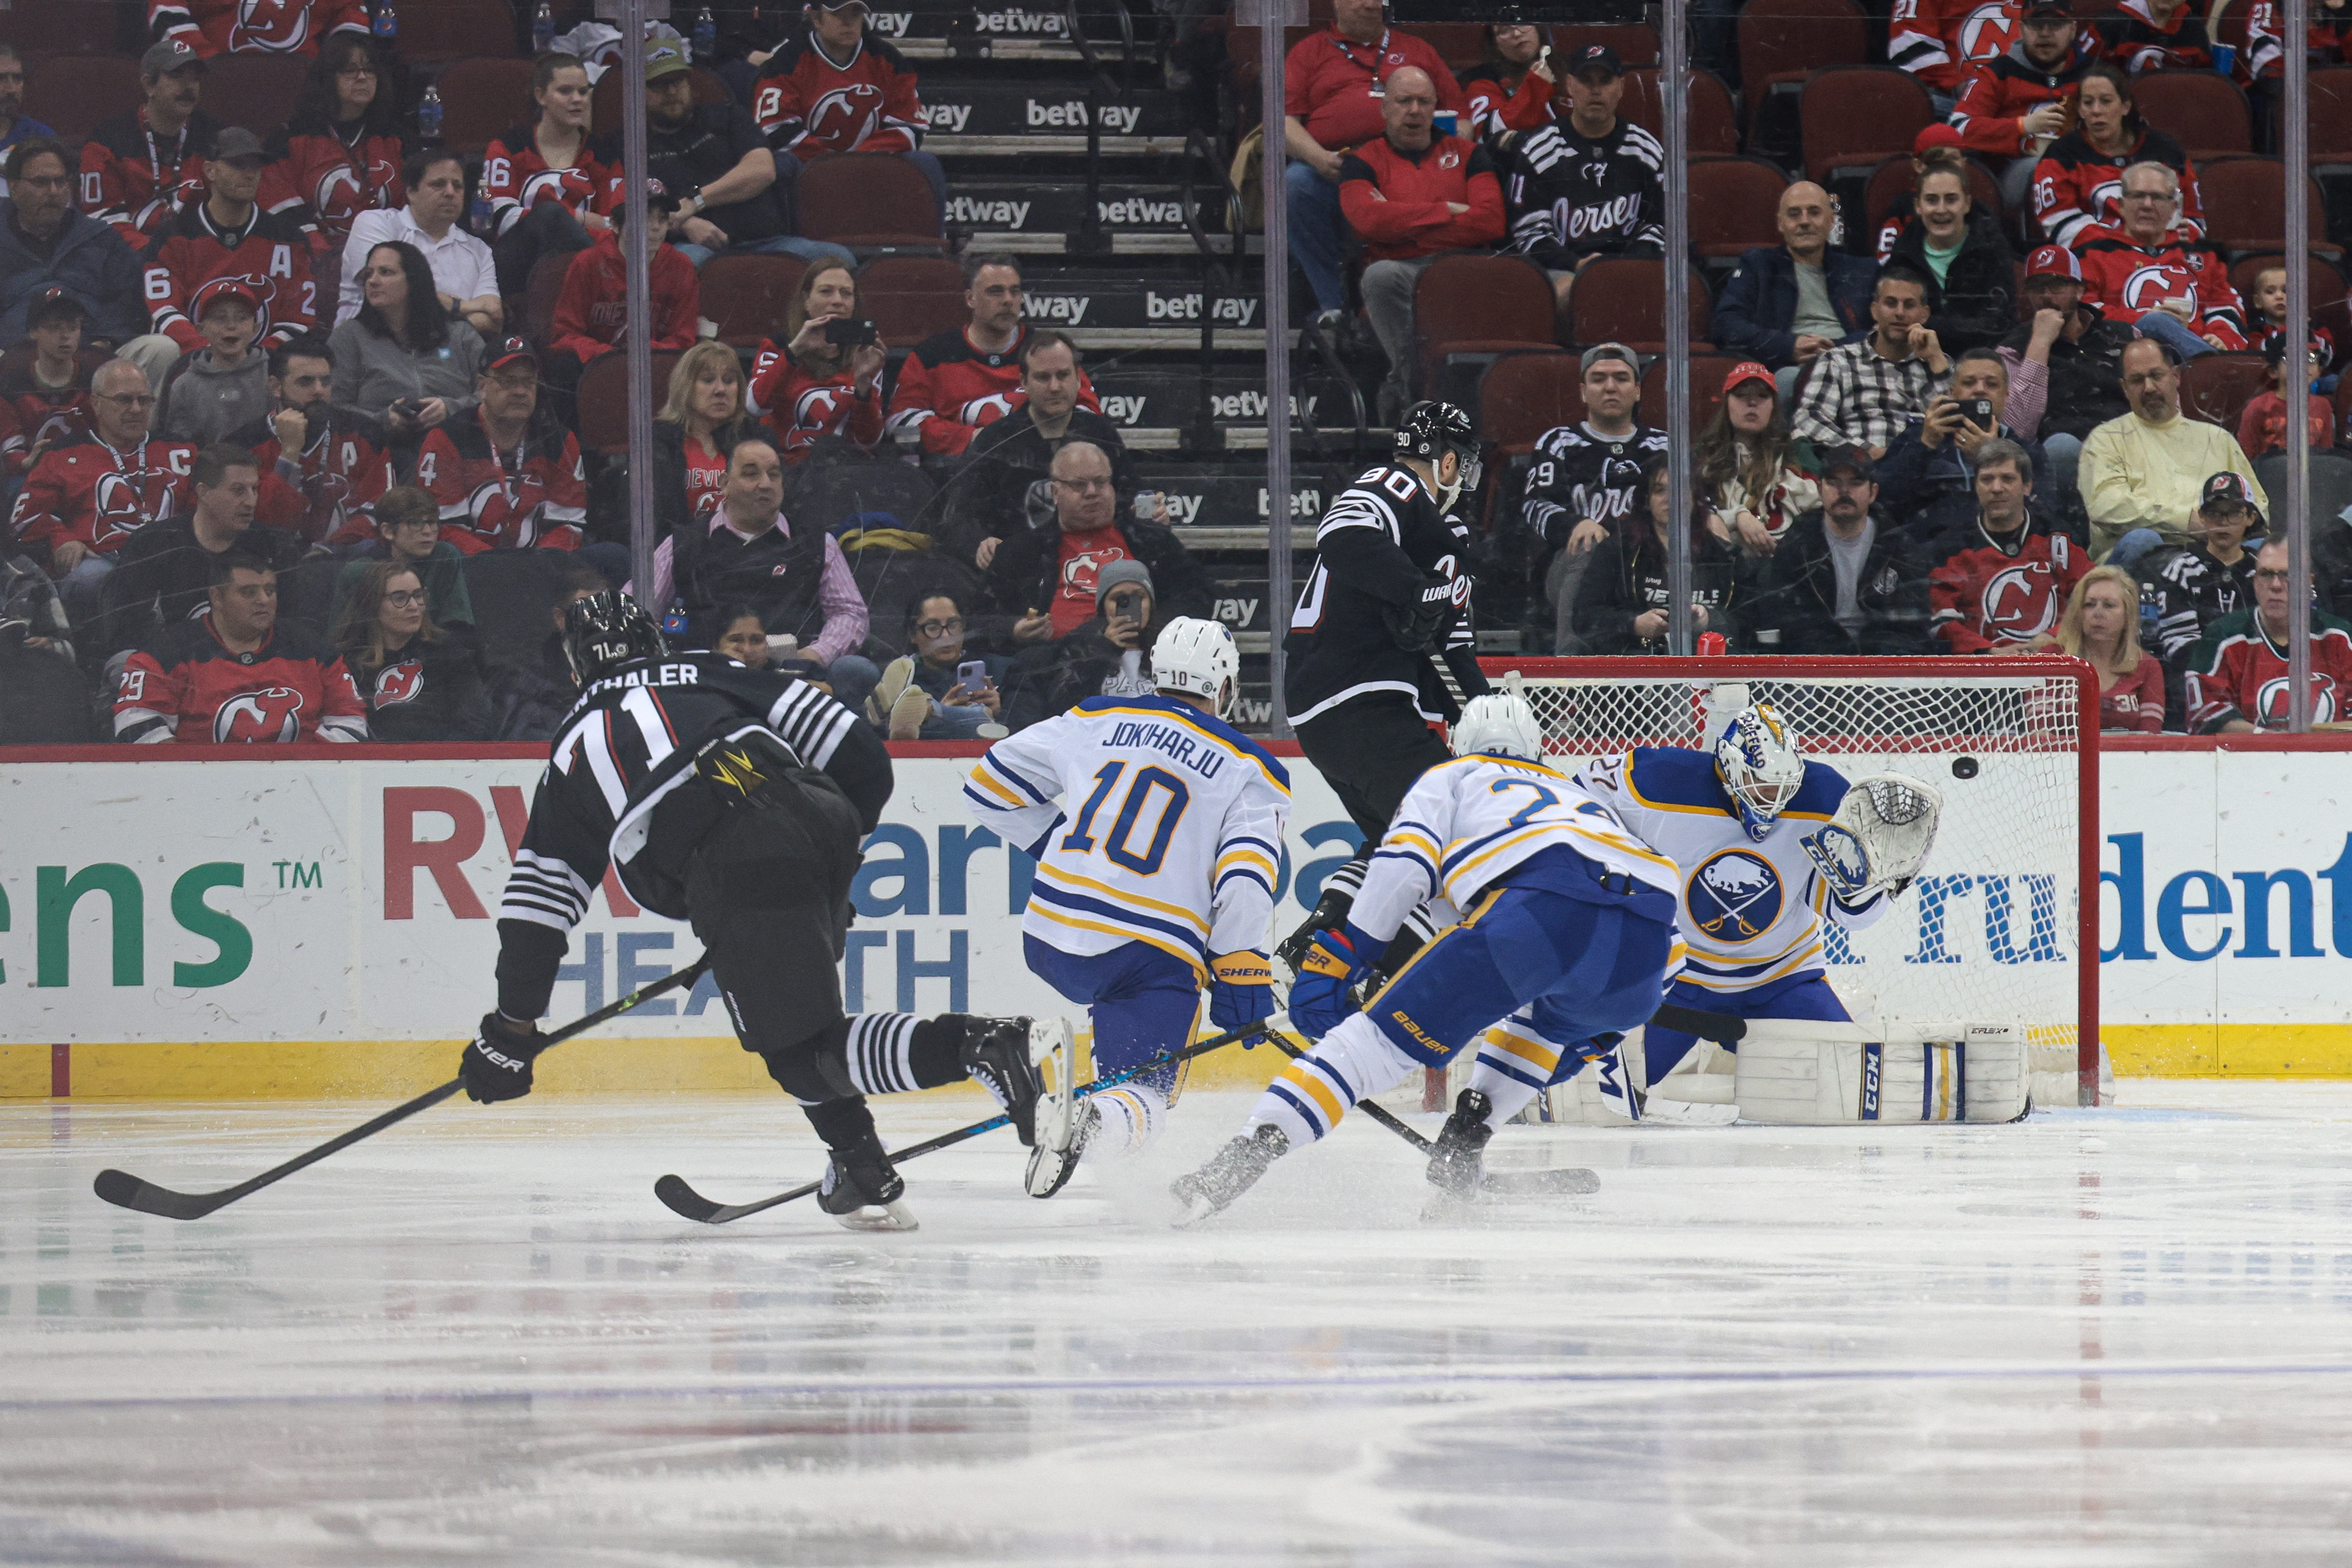 Devils' 6-2 romp eliminates Sabres from playoff contention - The